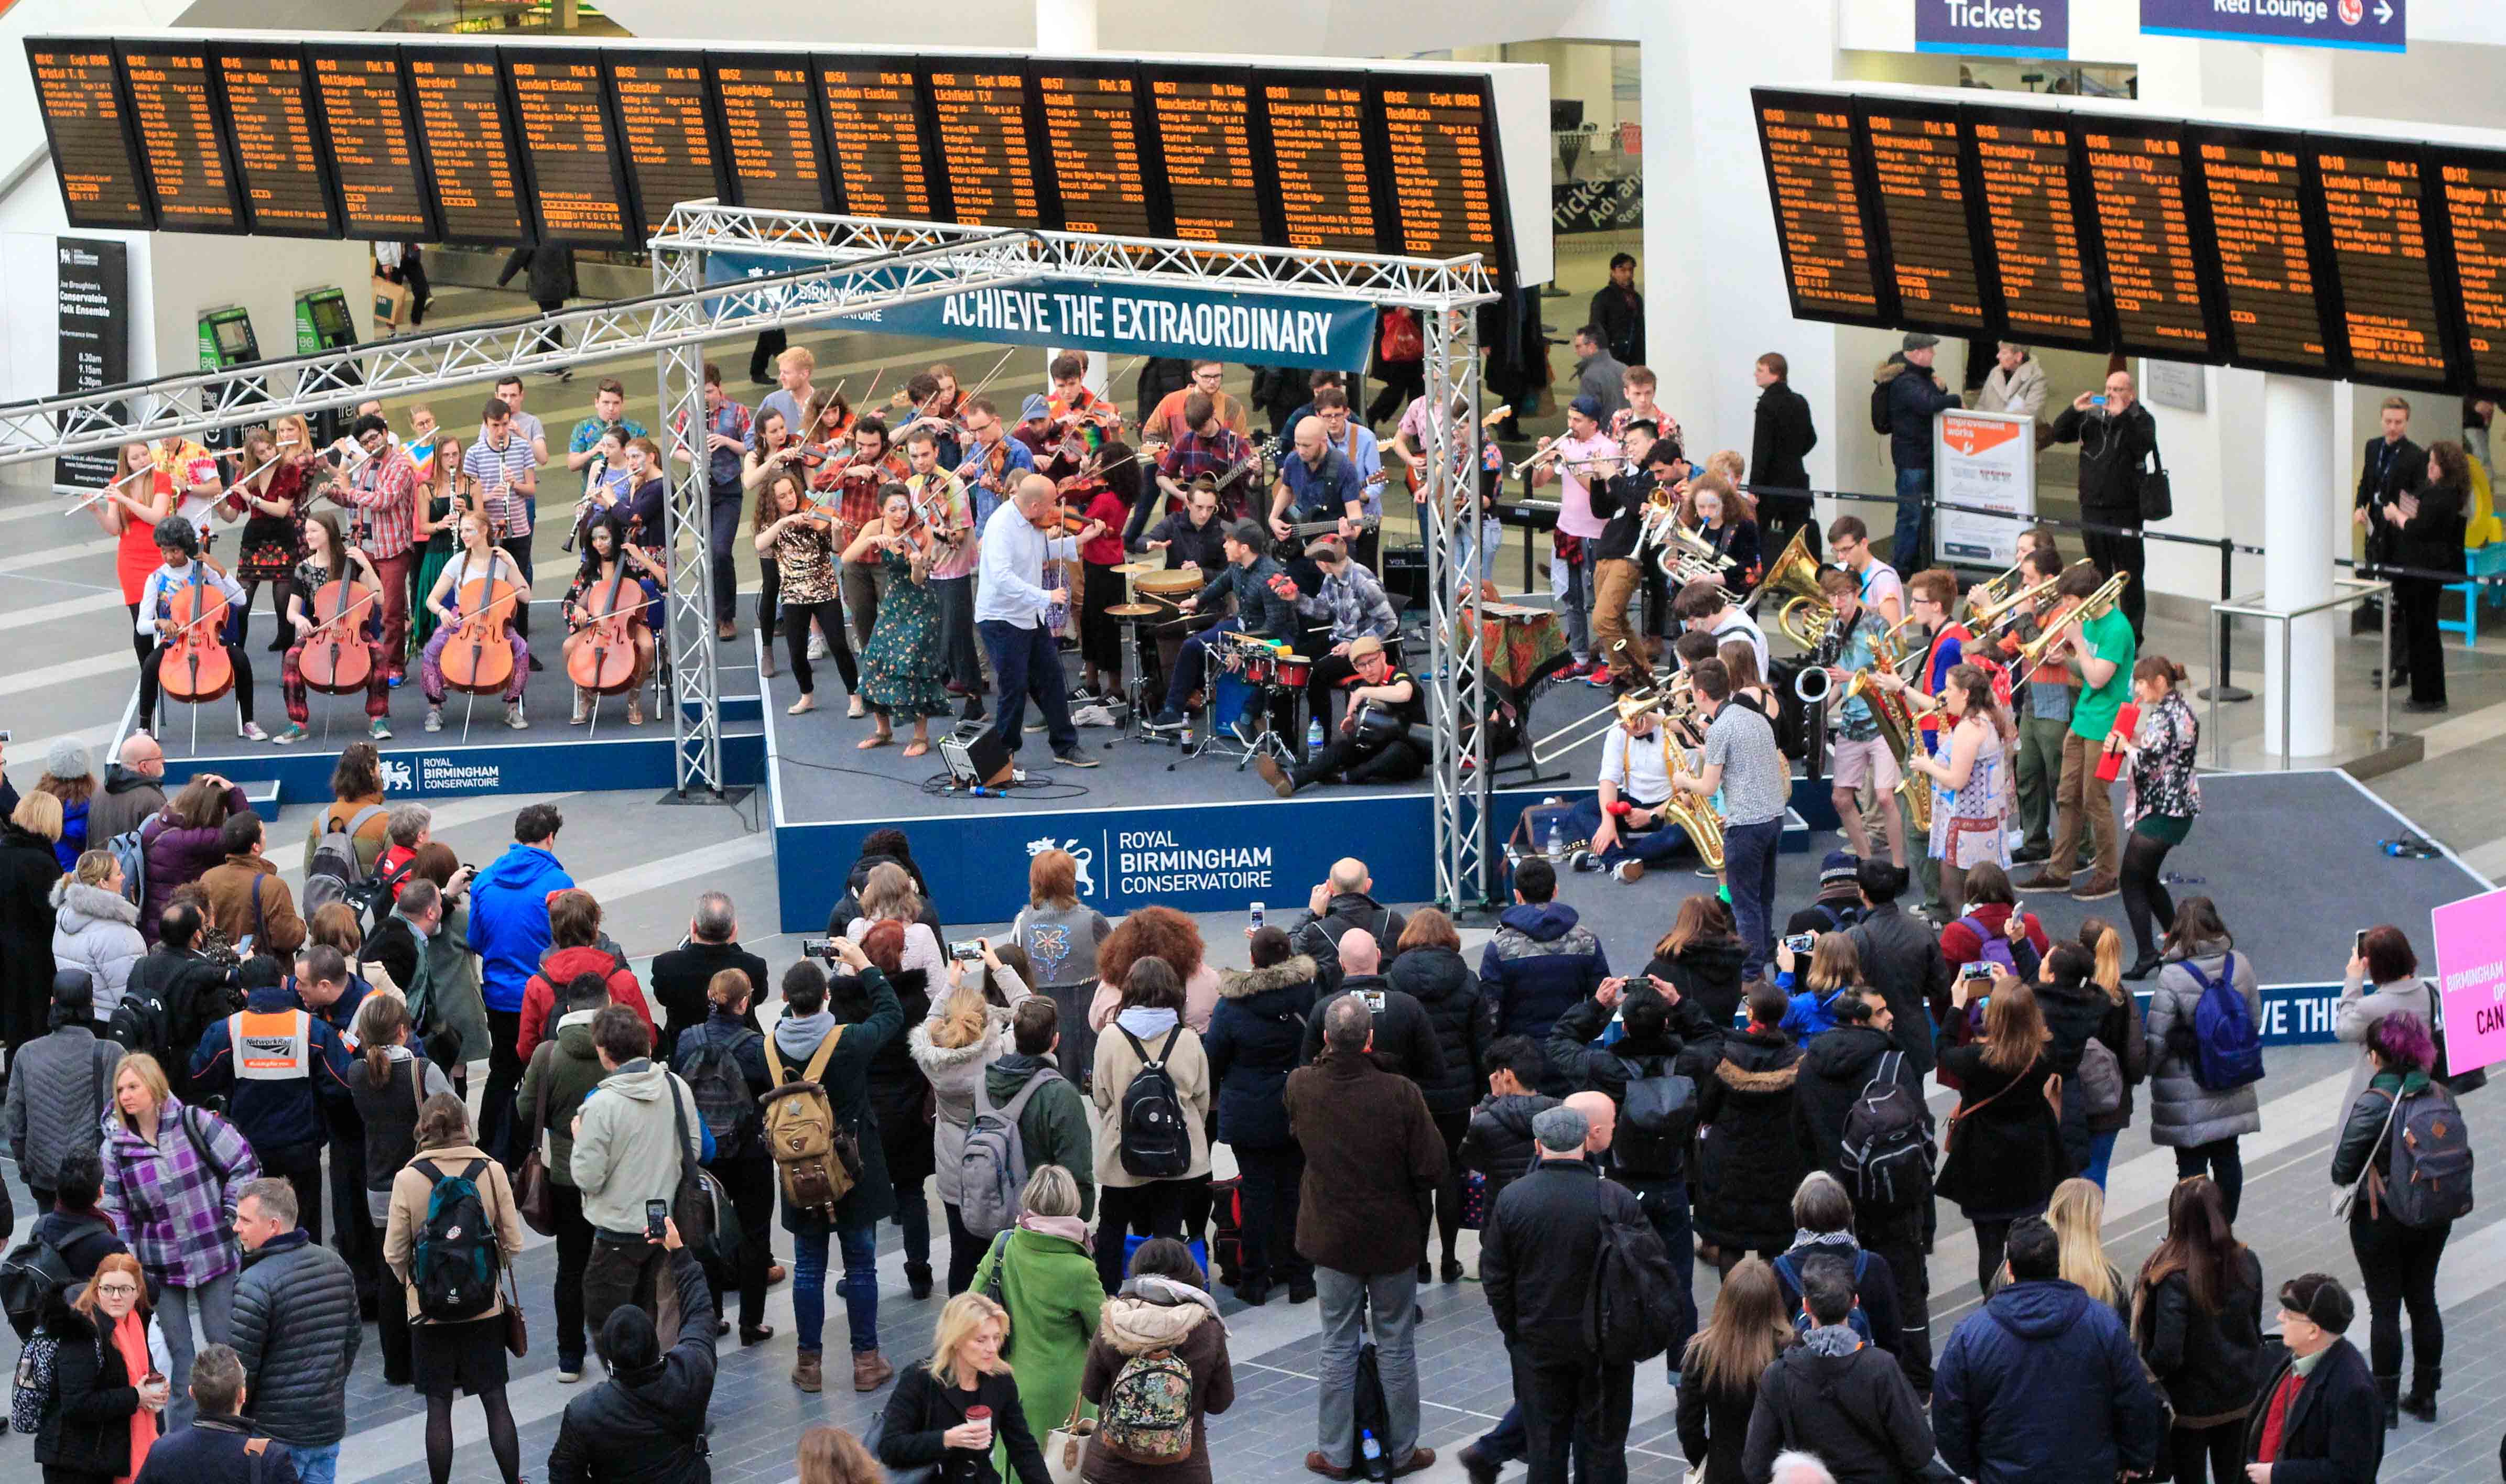 Fifteen horns, four cellos, five percussionists, five electric guitarists, plus fiddles, flutes, clarinets, double-bass, electric bass, euphonium, acoustic guitar, octave mandola, and a harp were part of the live music performance at New Street Station